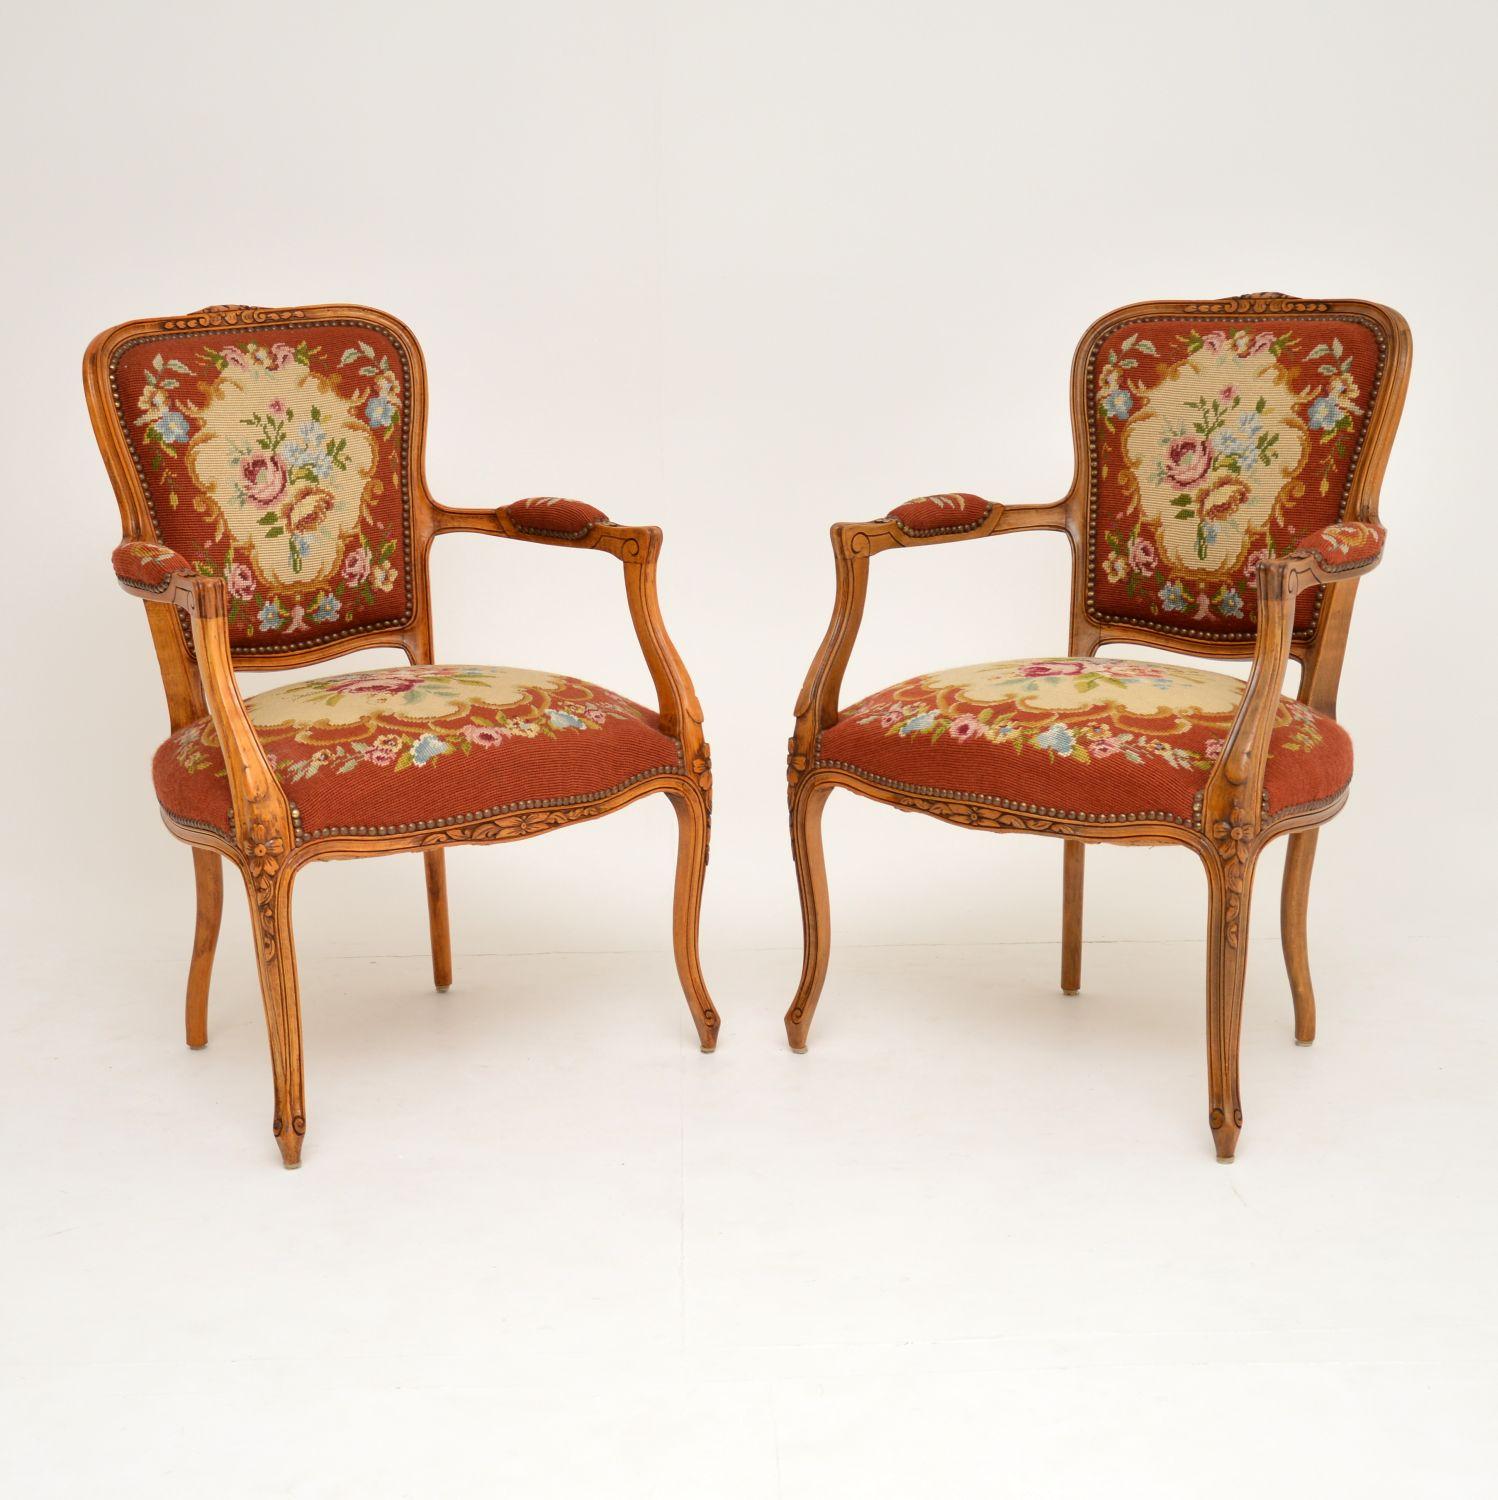 This pair of antique French salon armchairs are in excellent original condition & date from around the 1890-1910 period.

What's nice, is that they still have the original needlepoint upholstery which is in very good condition. They have sturdy